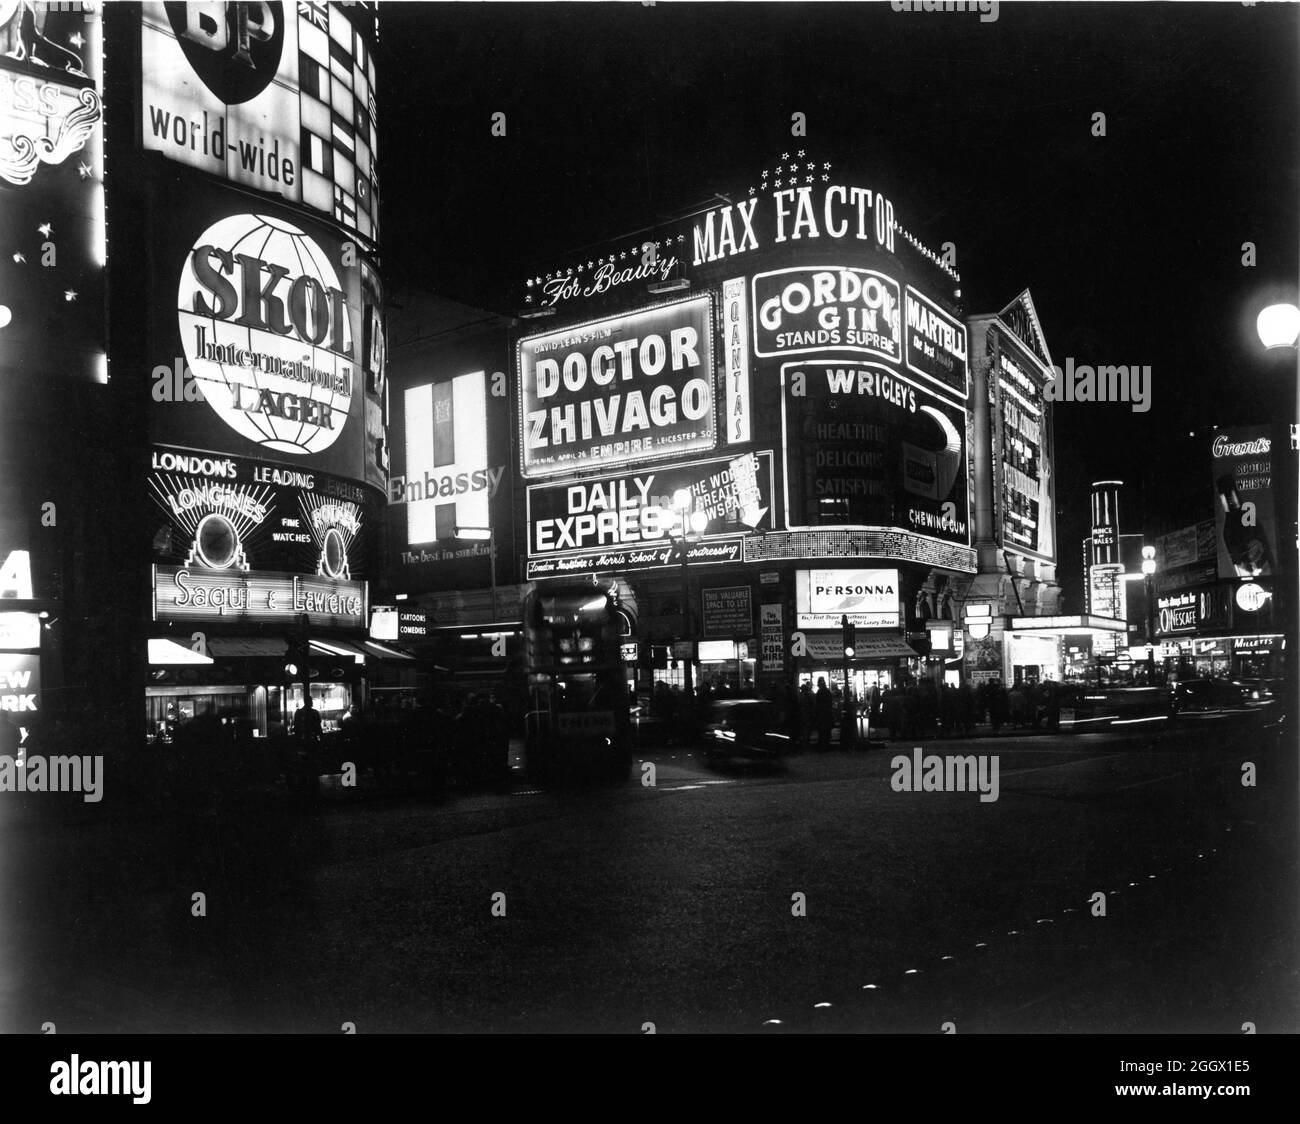 LONDON PAVILION cinema on Piccadilly Circus, London in early 1966 when it was presenting SEAN CONNERY as James Bond 007 in THUNDERBALL 1965 director TERENCE YOUNG producers Harry Saltzman and Albert R. Broccoli Eon Productions / United Artists with Illuminated Billboard trailering the forthcoming DOCTOR ZHIVAGO director DAVID LEAN for Metro Goldwyn Mayer at the Empire Theatre Leicester Square Stock Photo